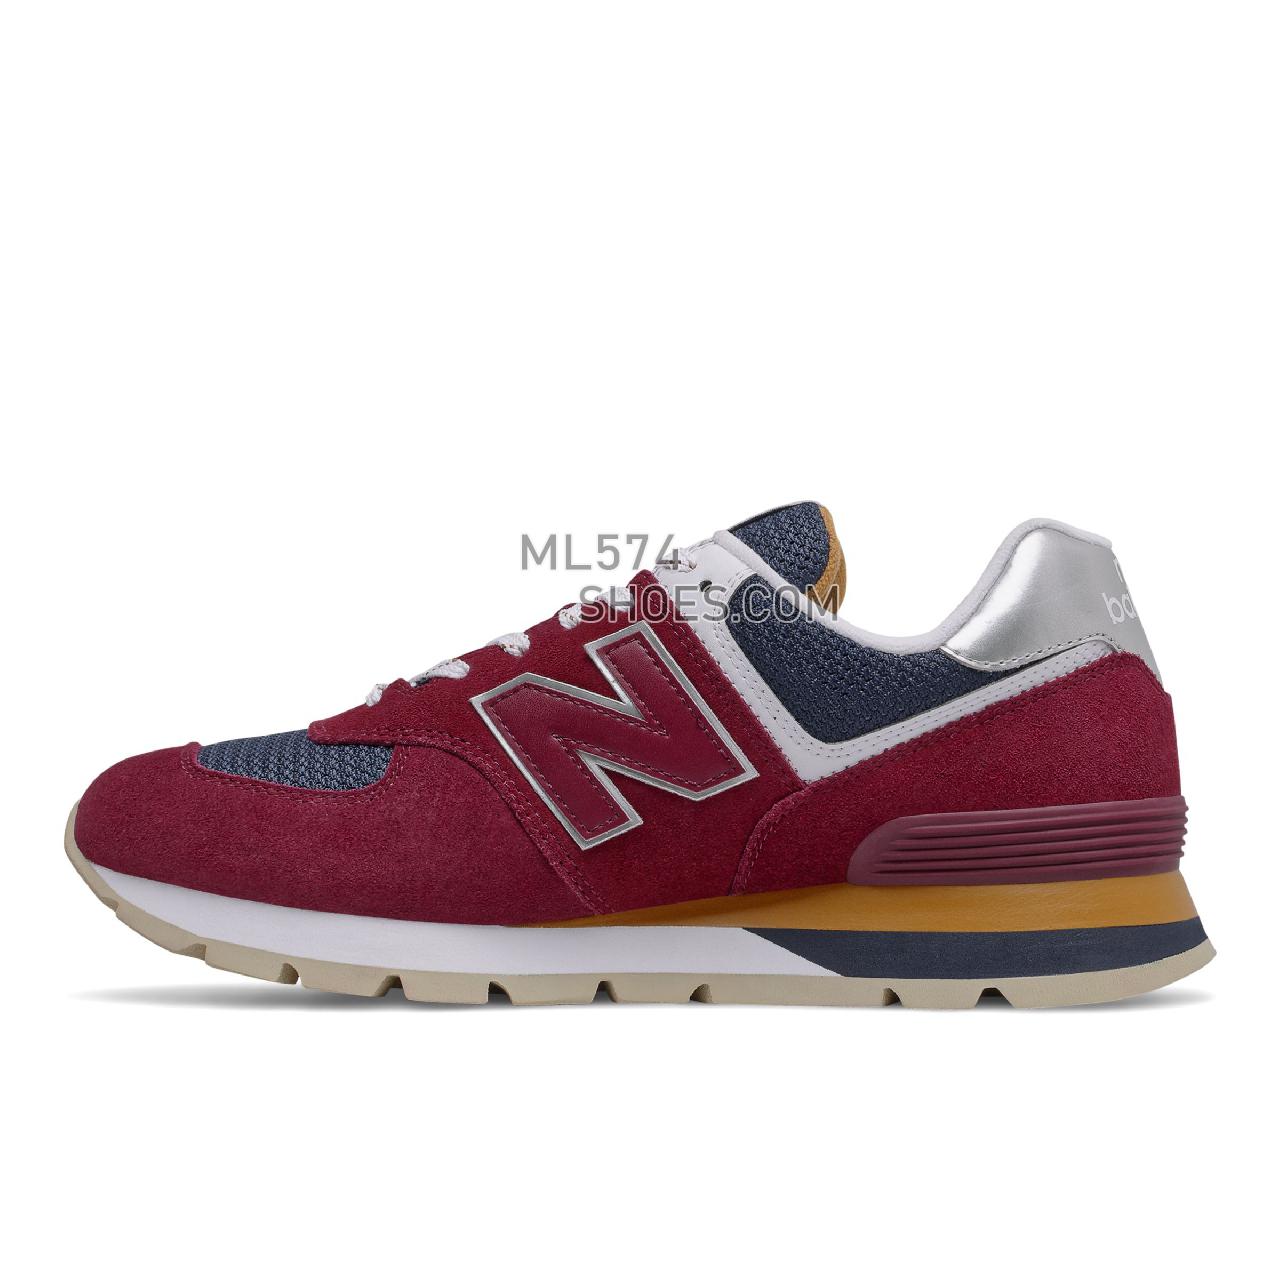 New Balance 574 Rugged - Men's Classic Sneakers - Garnet with Workwear - ML574DHR